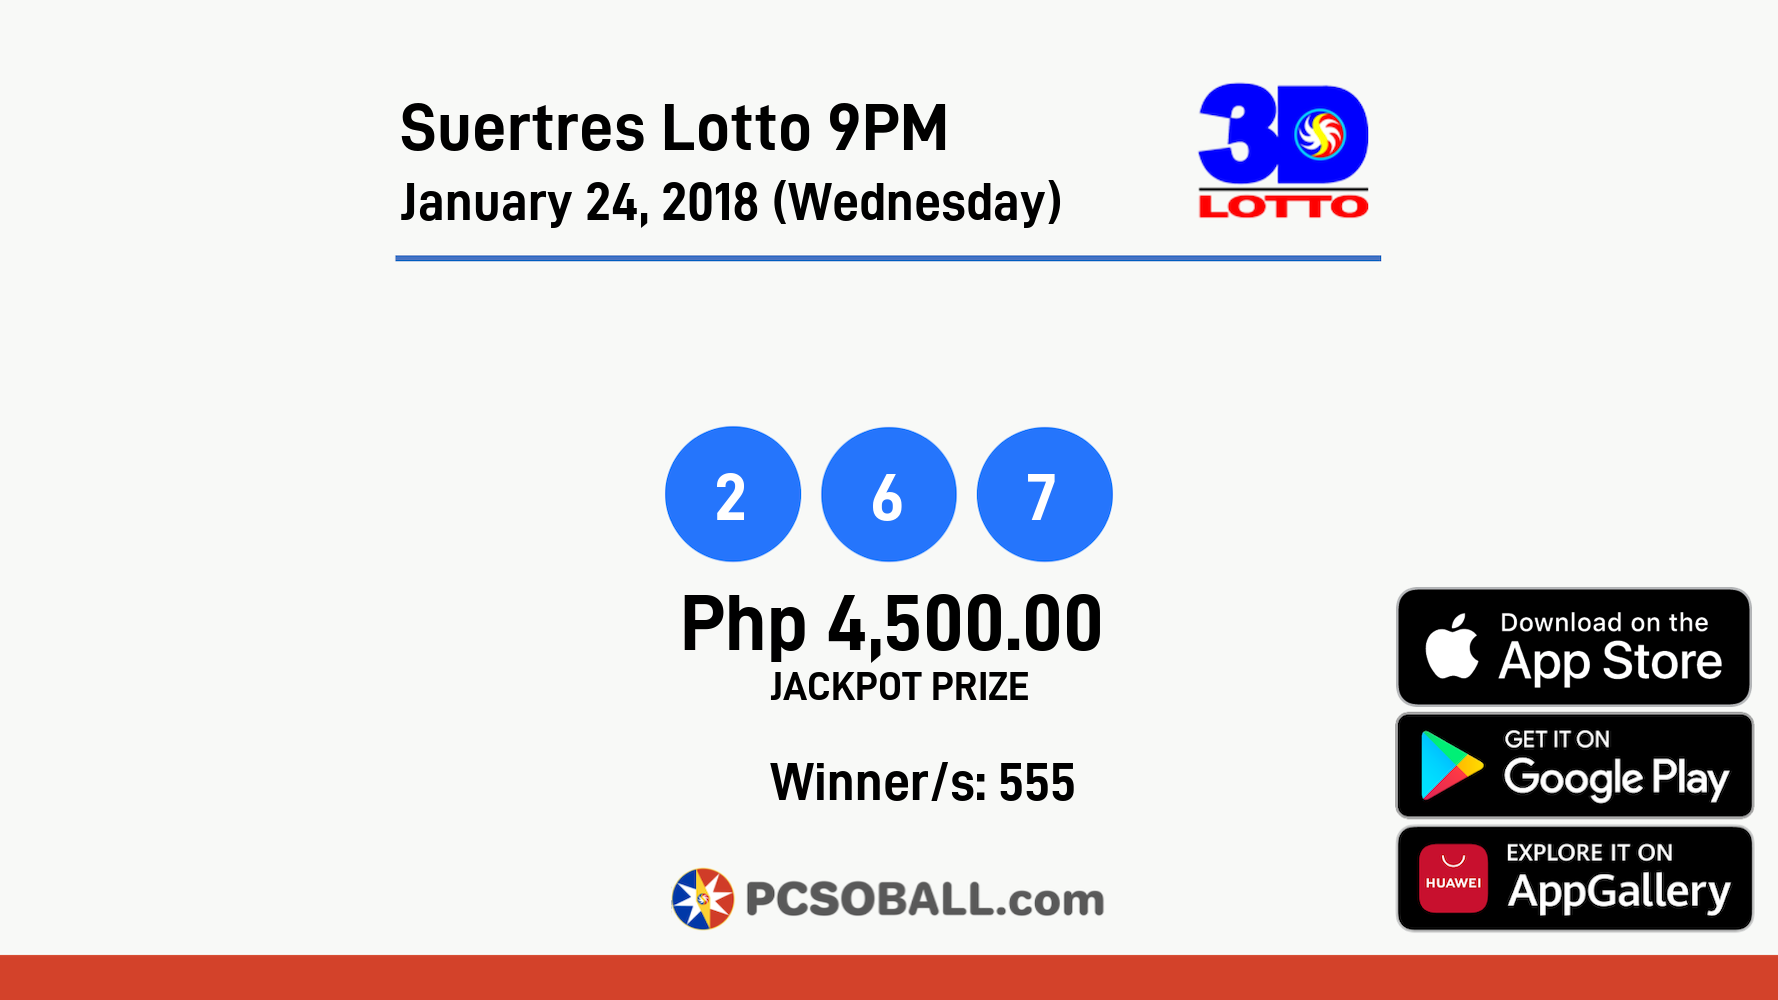 Suertres Lotto 9PM January 24, 2018 (Wednesday) Result